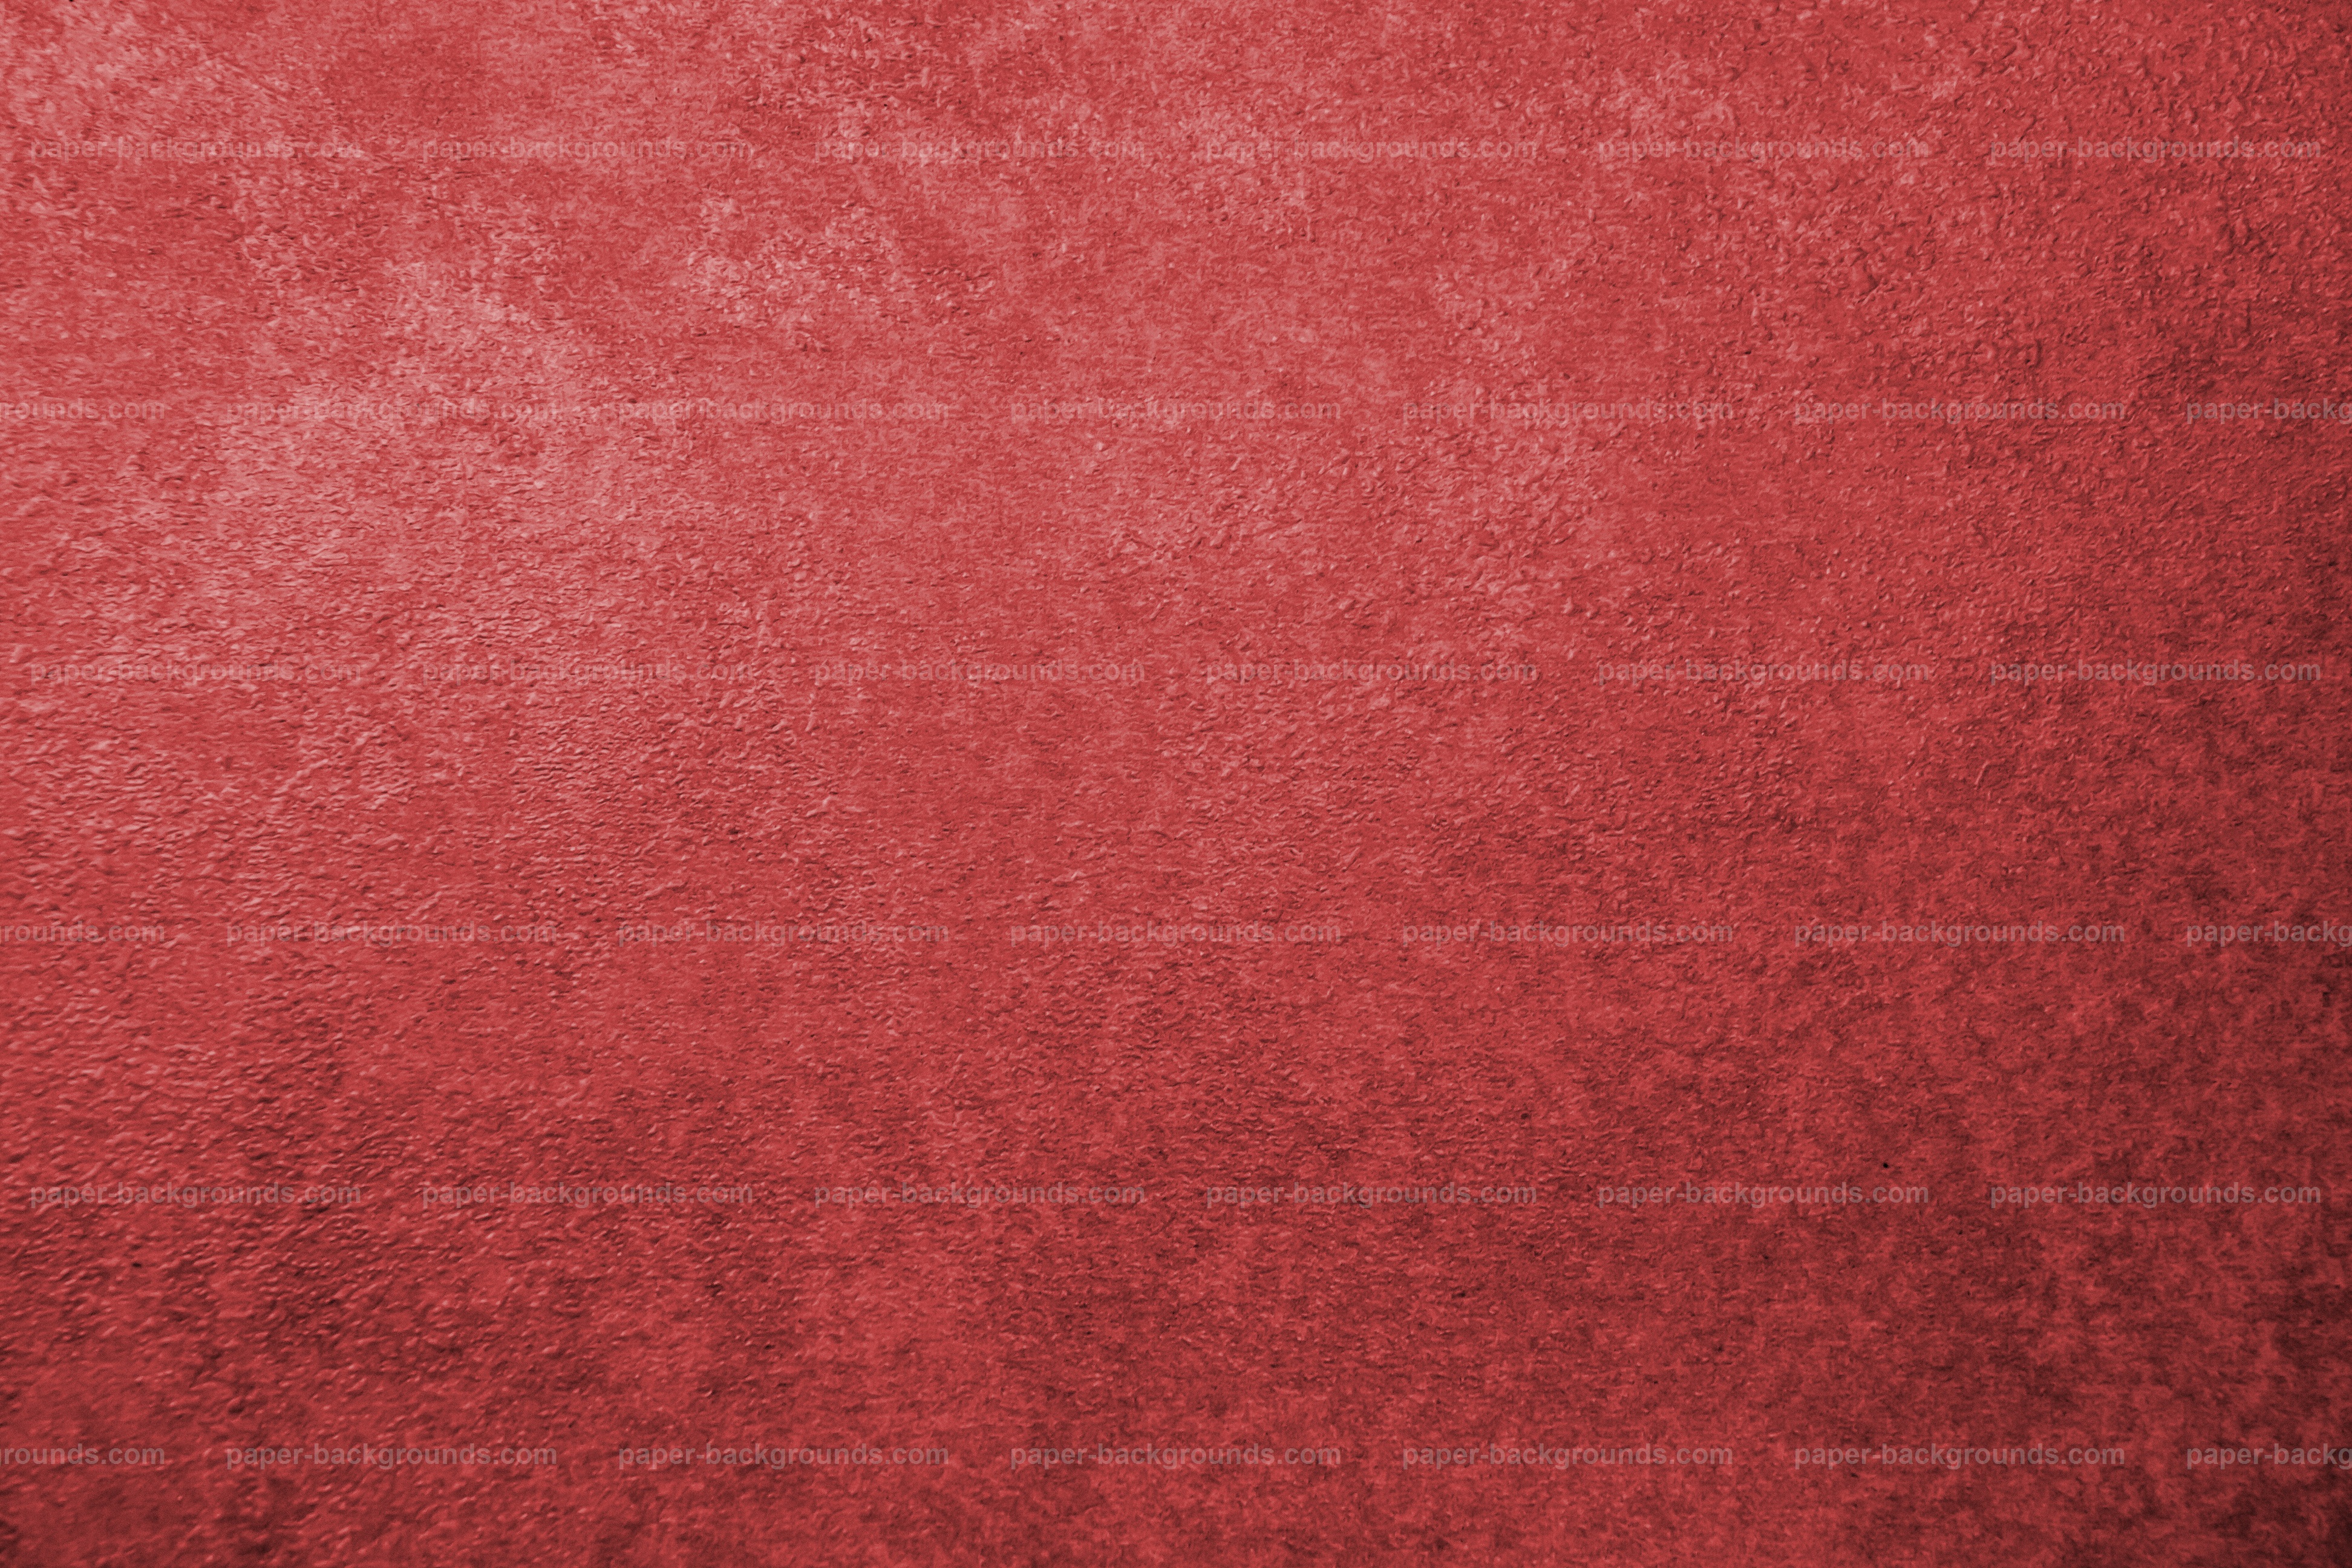 Paper Background Red Wall Texture Vintage Background